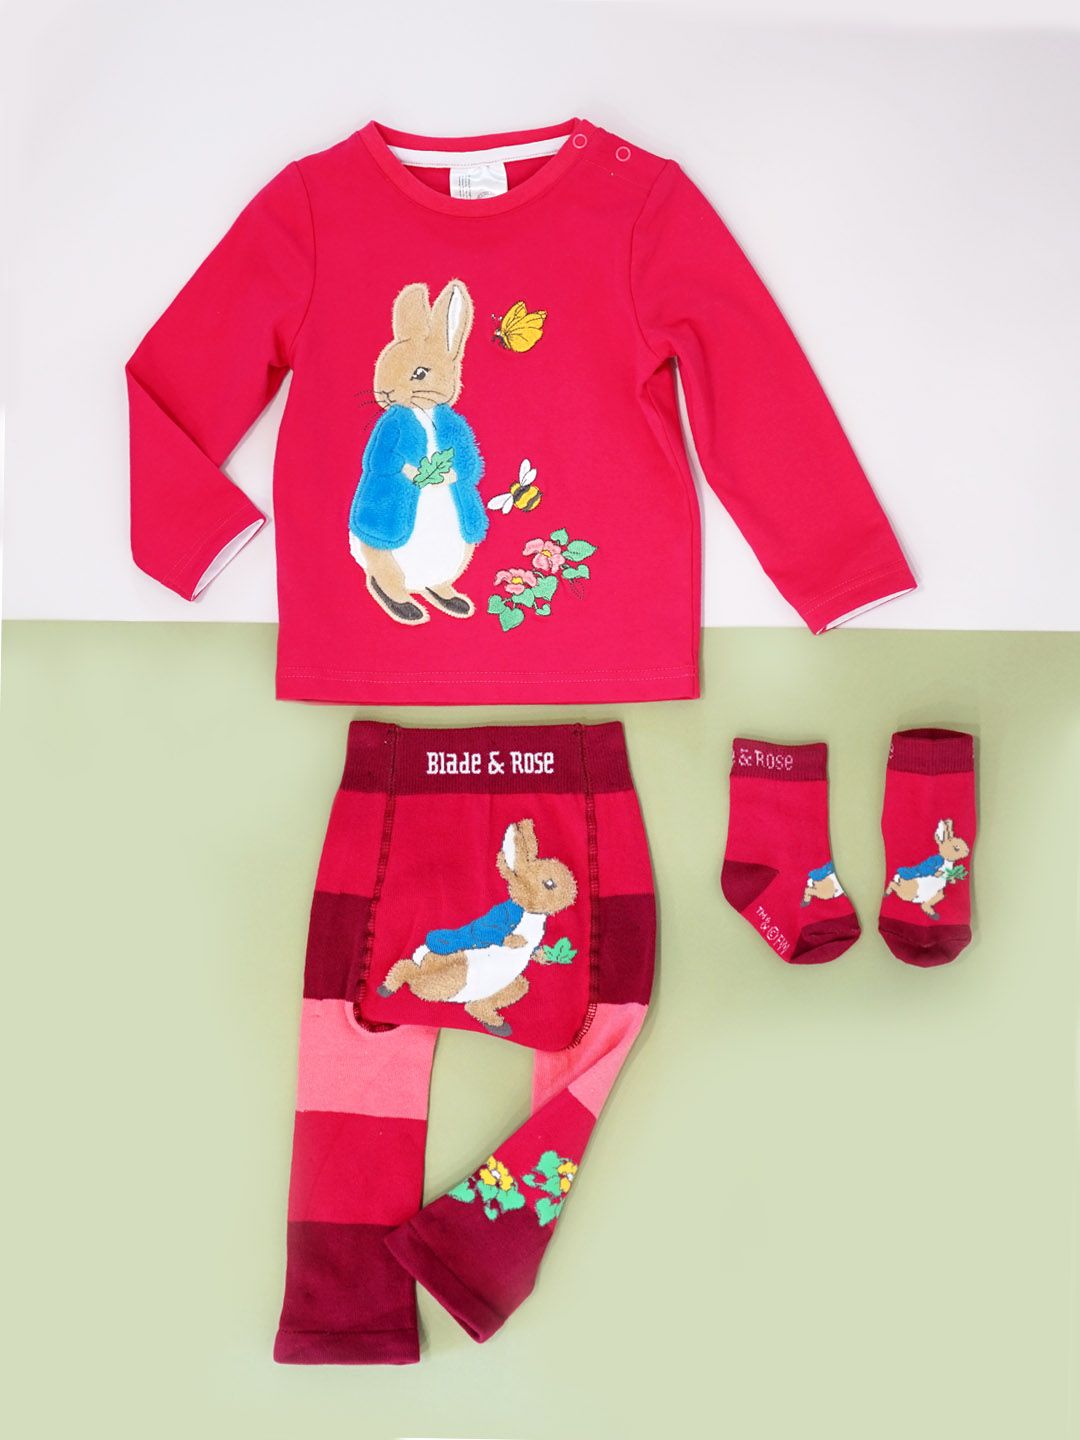 blade & rose peter rabbit autumn leaf outfit at whippersnappers online